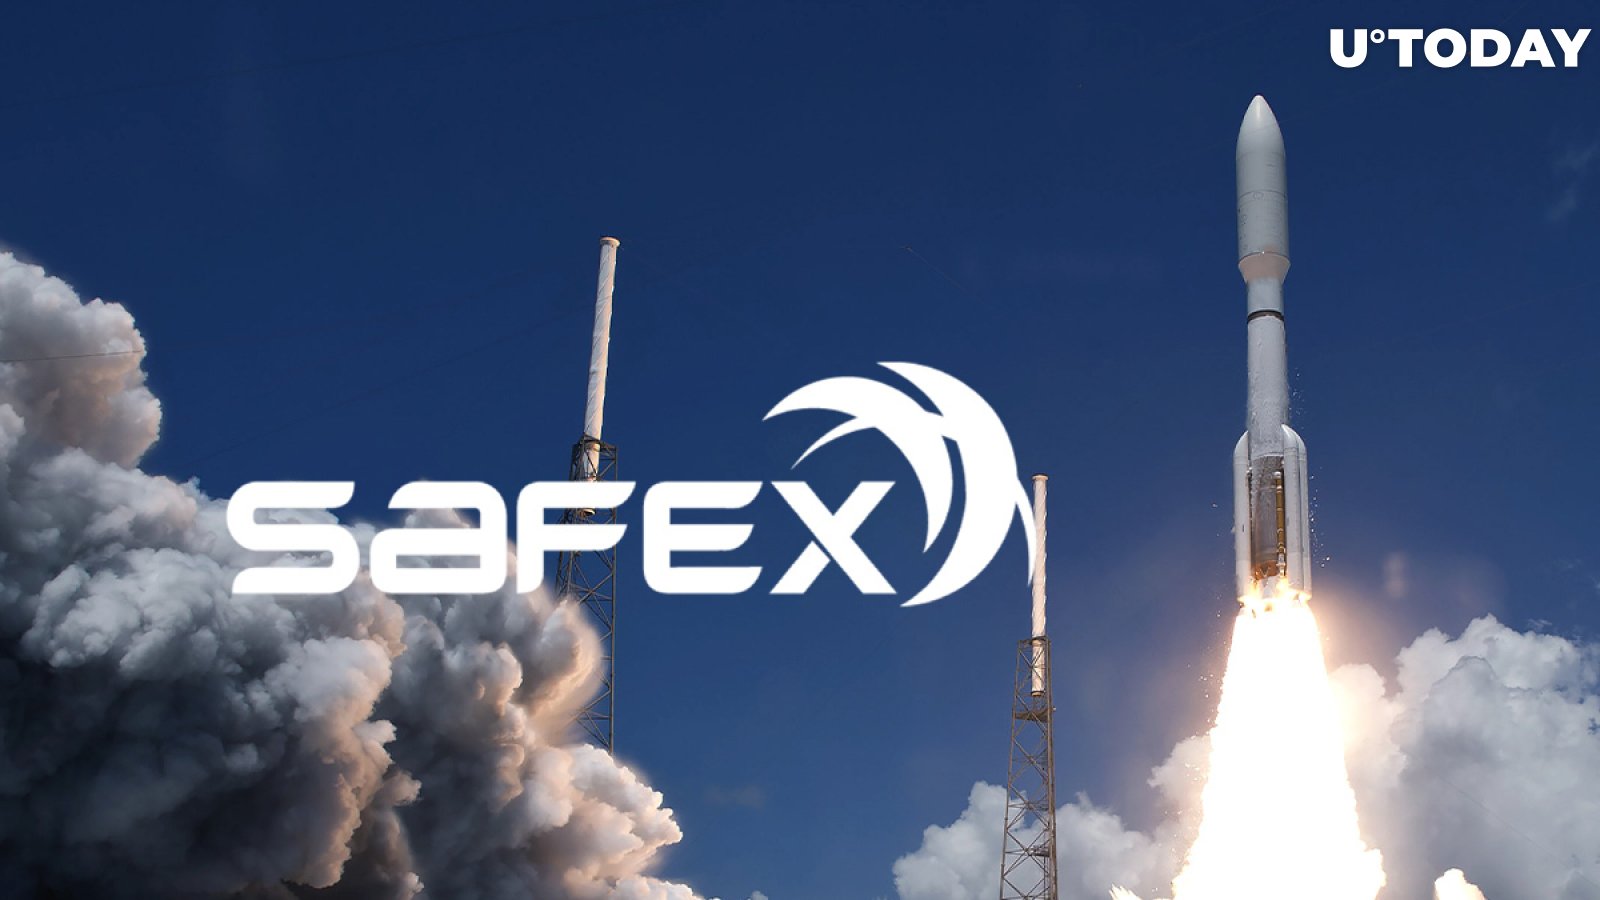 Safex Launches Crypto-Powered Marketplace as SFX Token Gets Listed on Exchanges